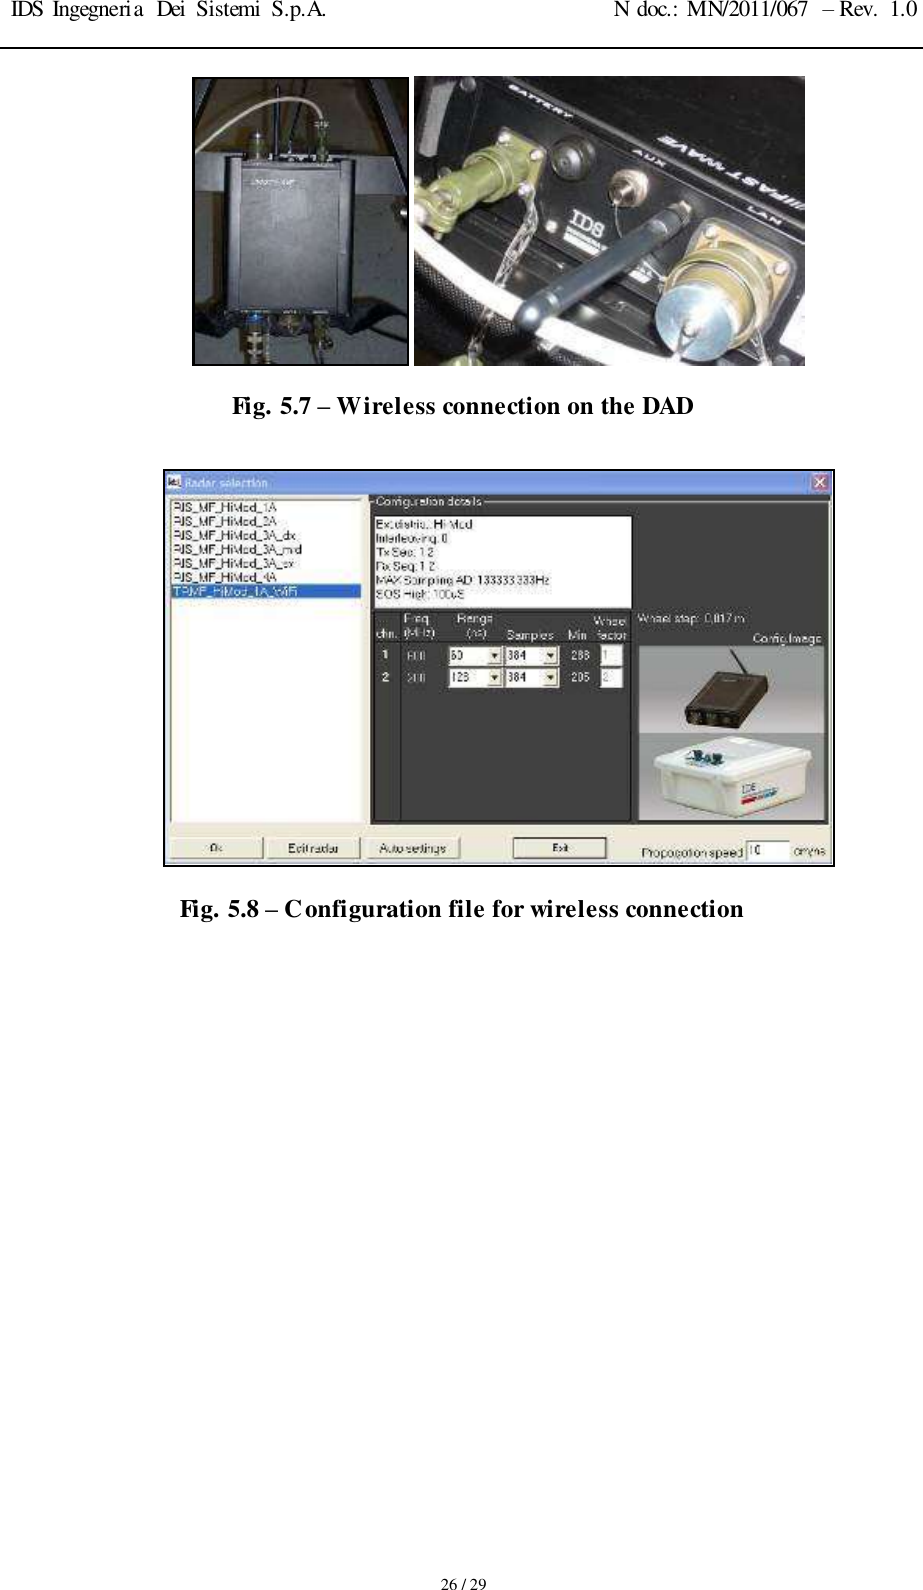 IDS Ingegneria  Dei  Sistemi  S.p.A. N doc.: MN/2011/067  – Rev.  1.0     26 / 29    Fig. 5.7 – Wireless connection on the DAD   Fig. 5.8 – Configuration file for wireless connection          